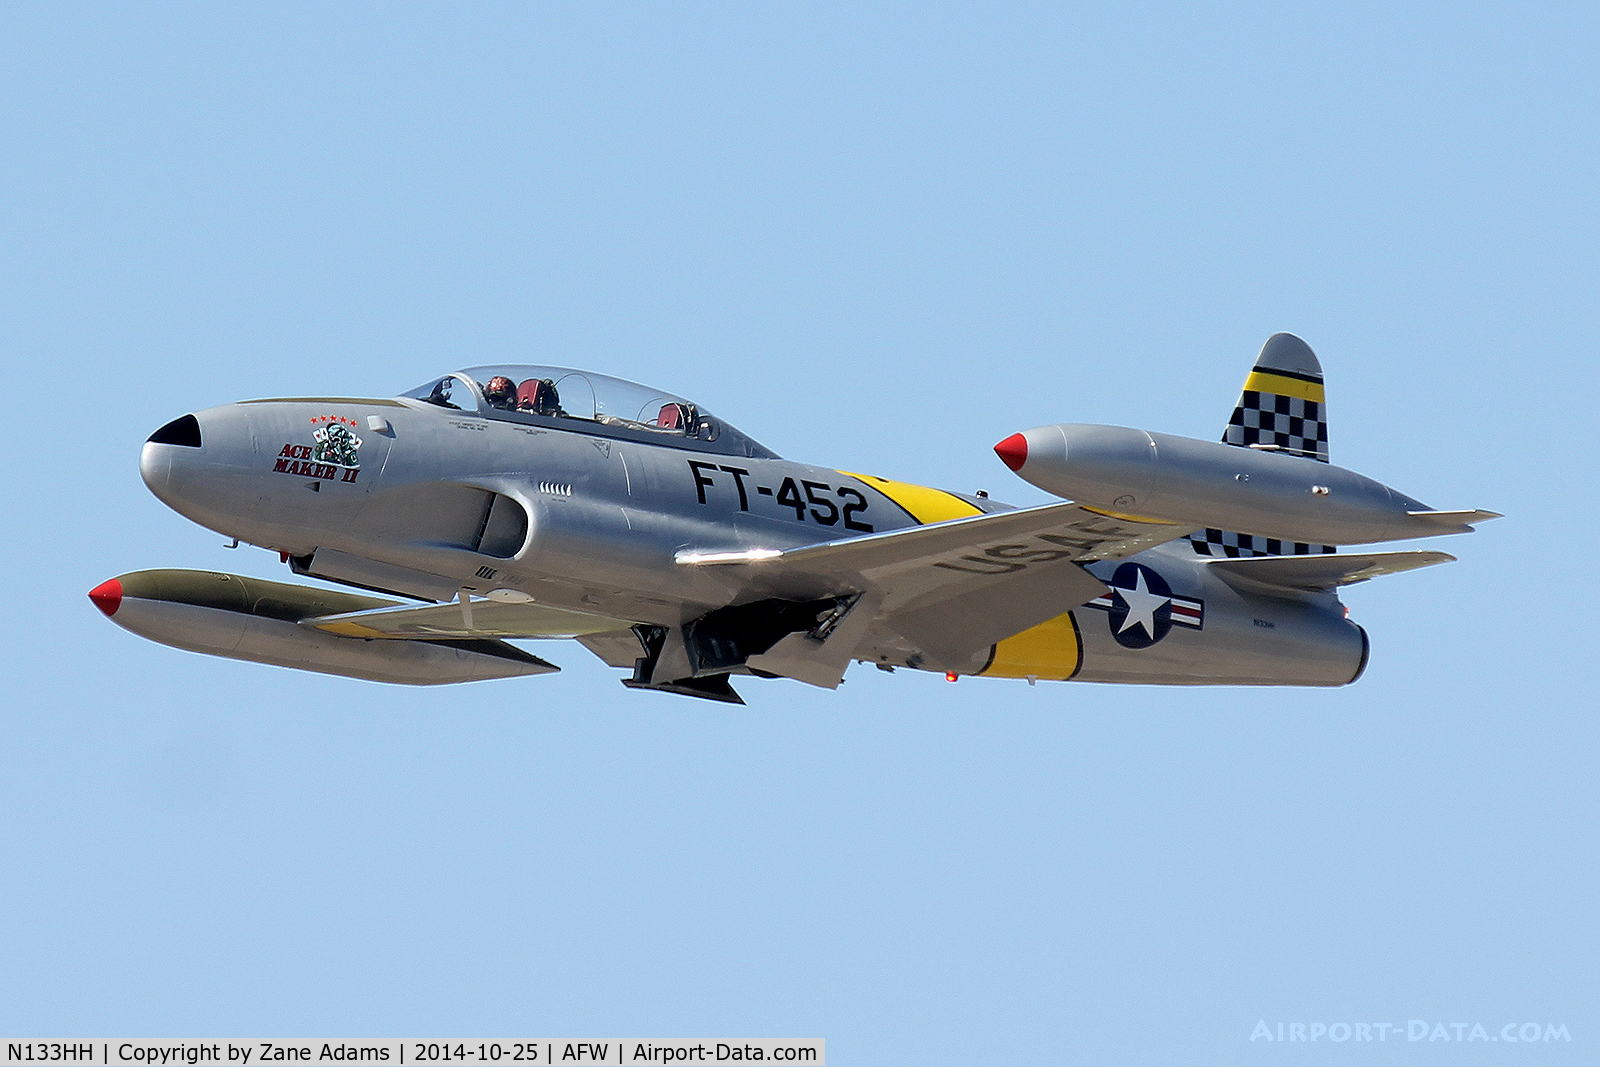 N133HH, Canadair CT-133 Silver Star 3 (CL-30) C/N 133452, At the 2014 Alliance Airshow - Fort Worth, TX